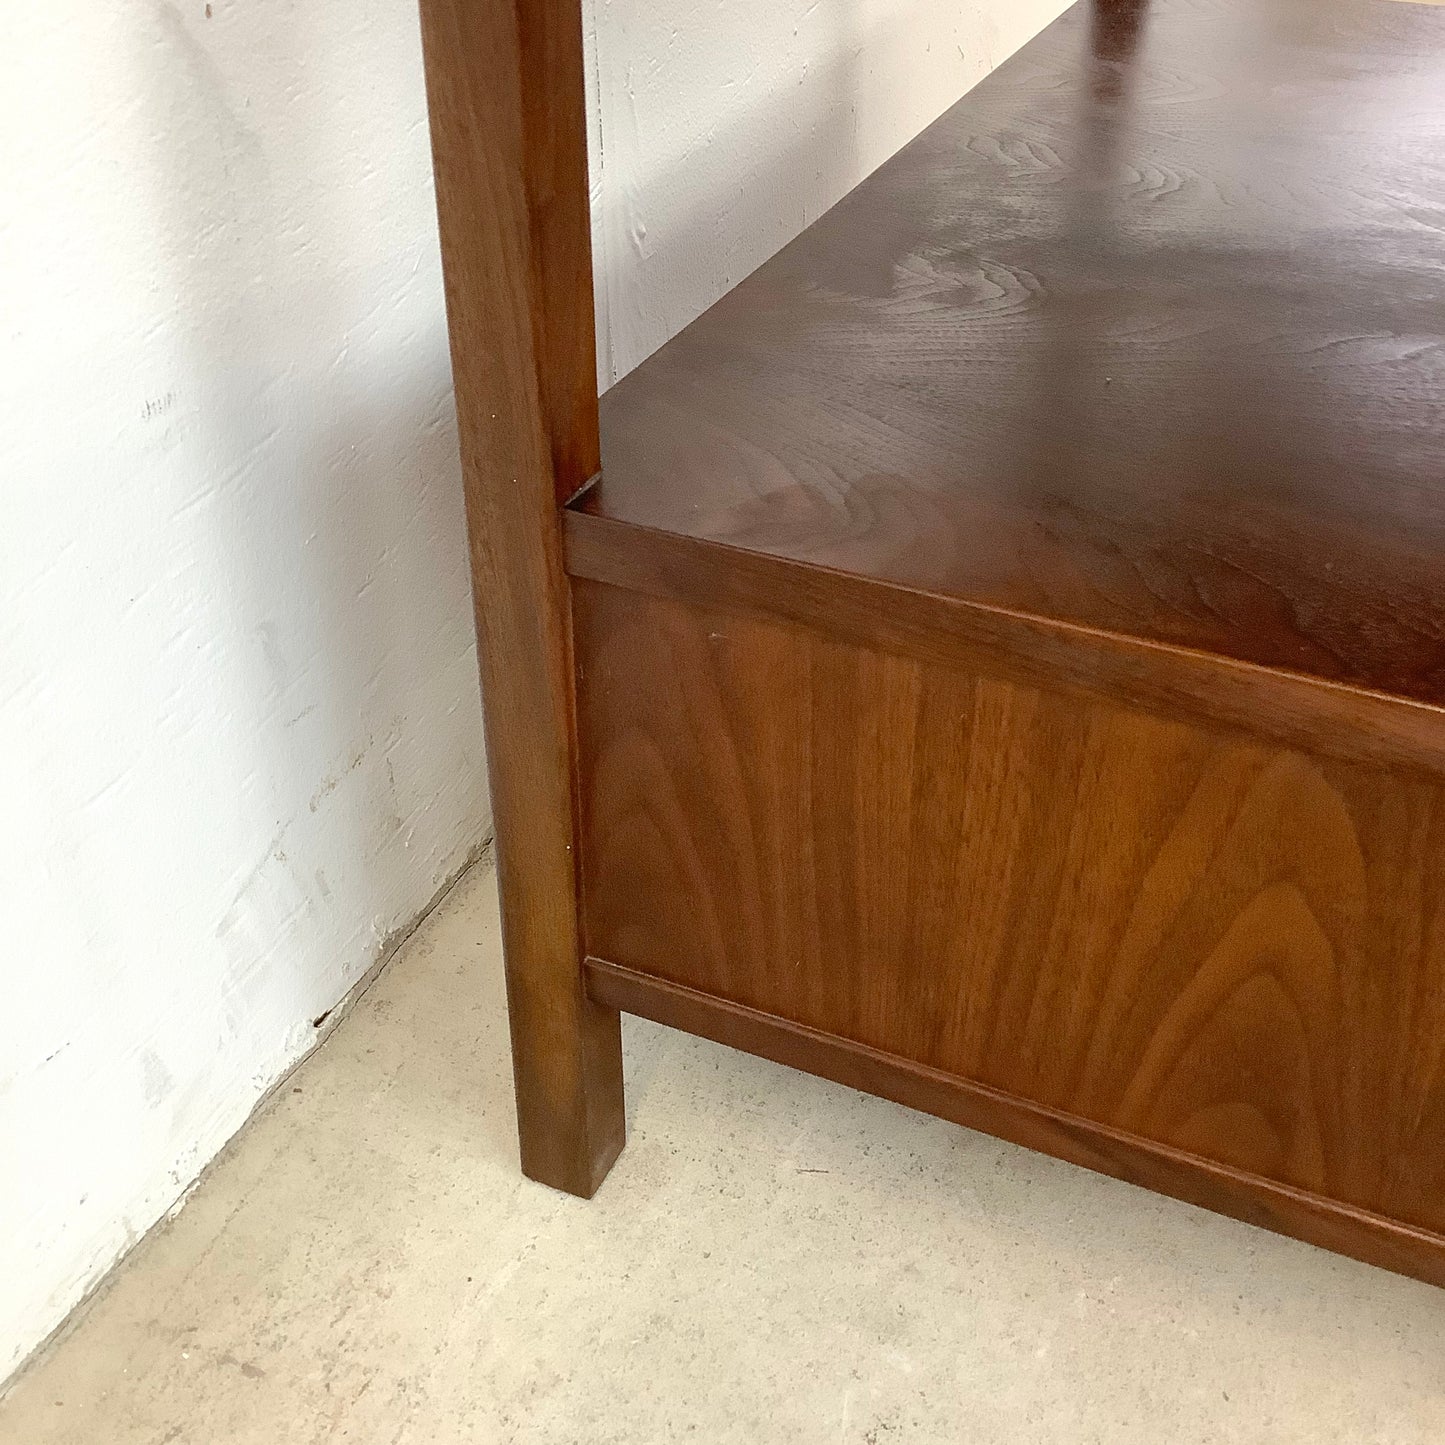 Mid-Century End Table With Drawers by Jack Cartwright for Founders